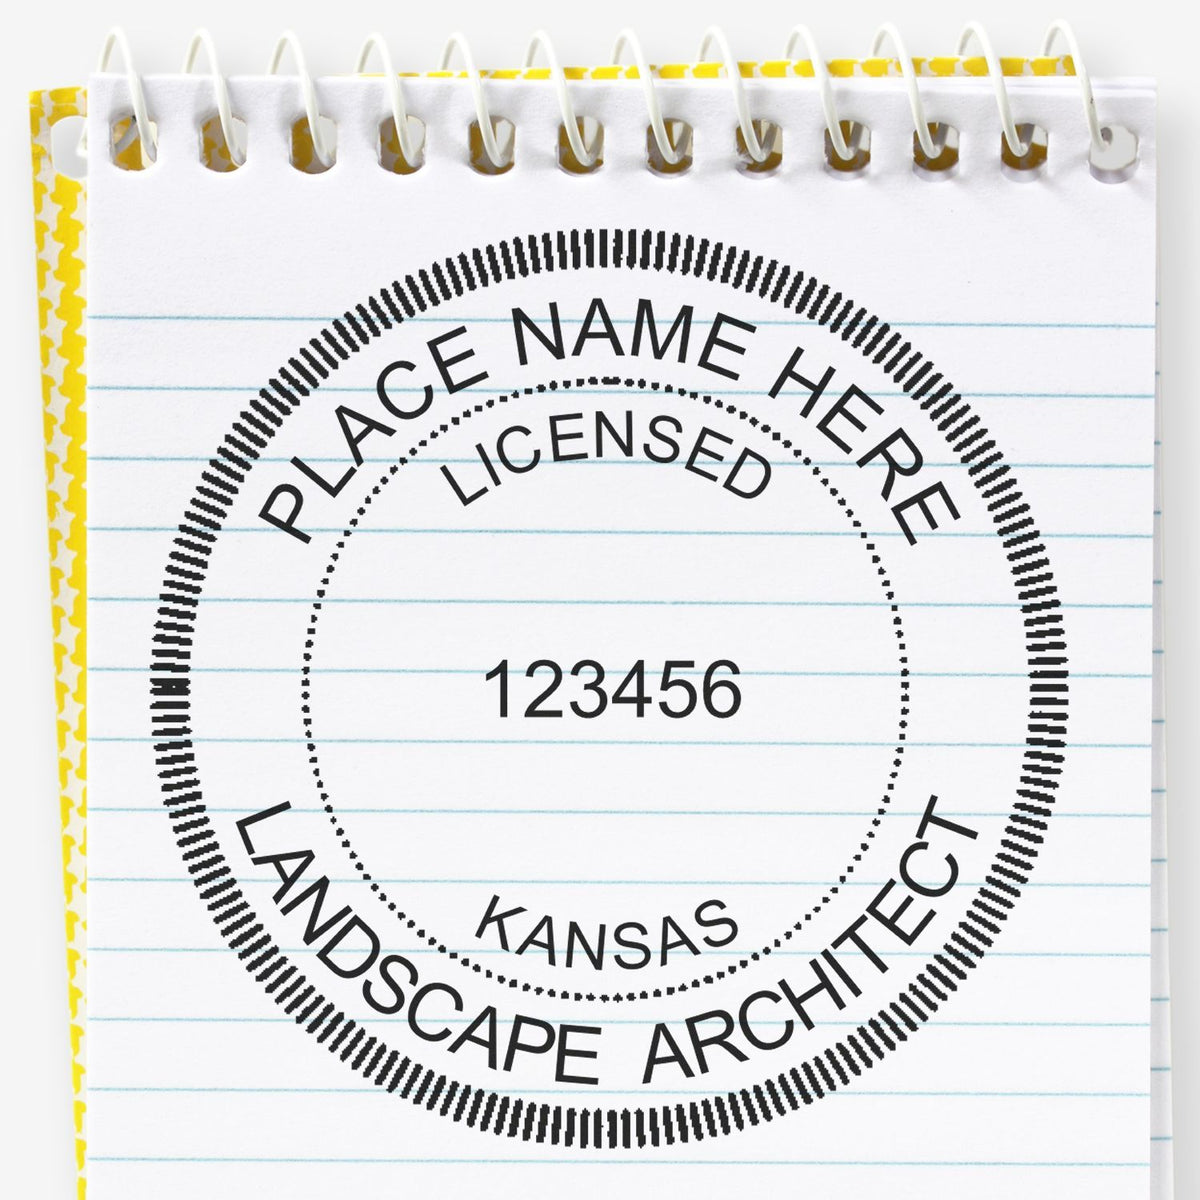 This paper is stamped with a sample imprint of the Kansas Landscape Architectural Seal Stamp, signifying its quality and reliability.